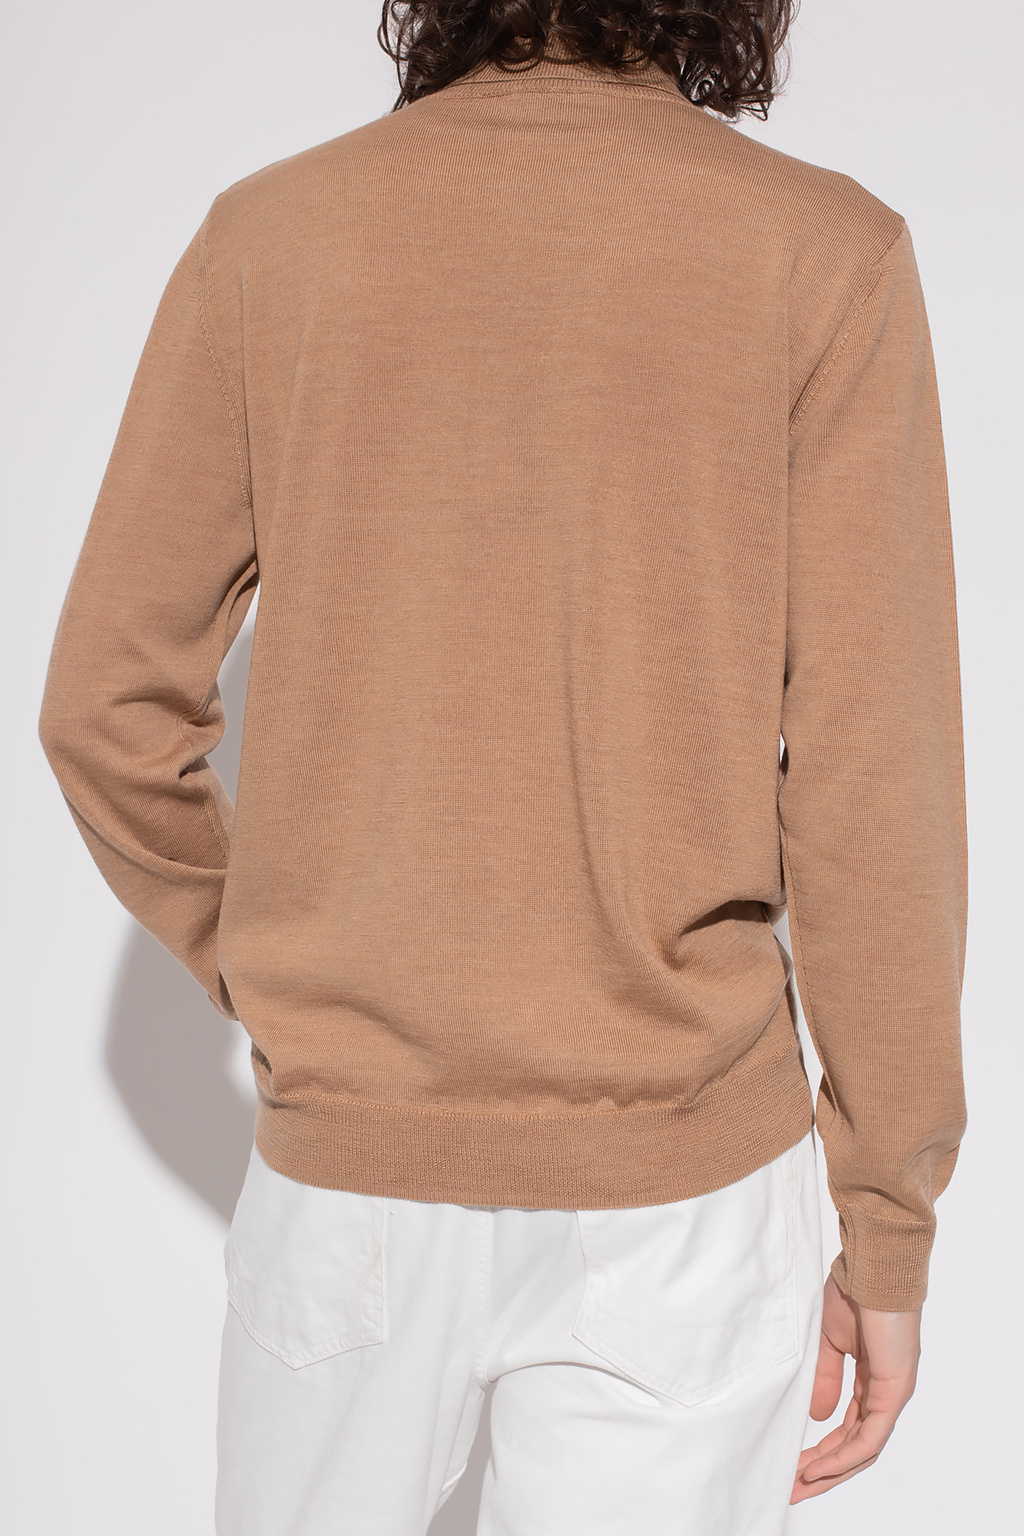 A.P.C. Sisley Pullover bianco naturale